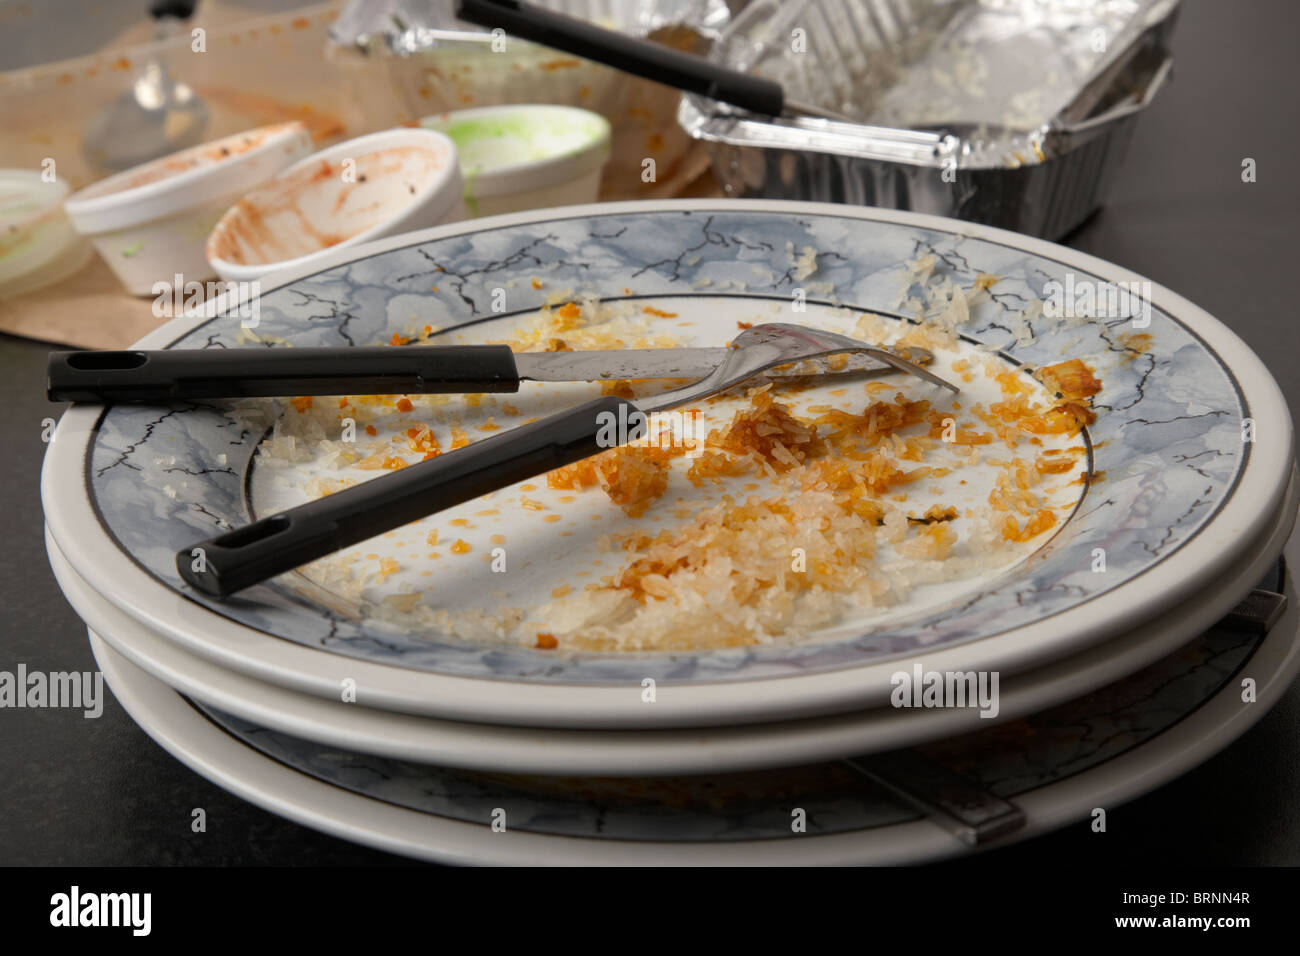 empty dirty plates and fast food cartons from an indian home takeaway Stock Photo